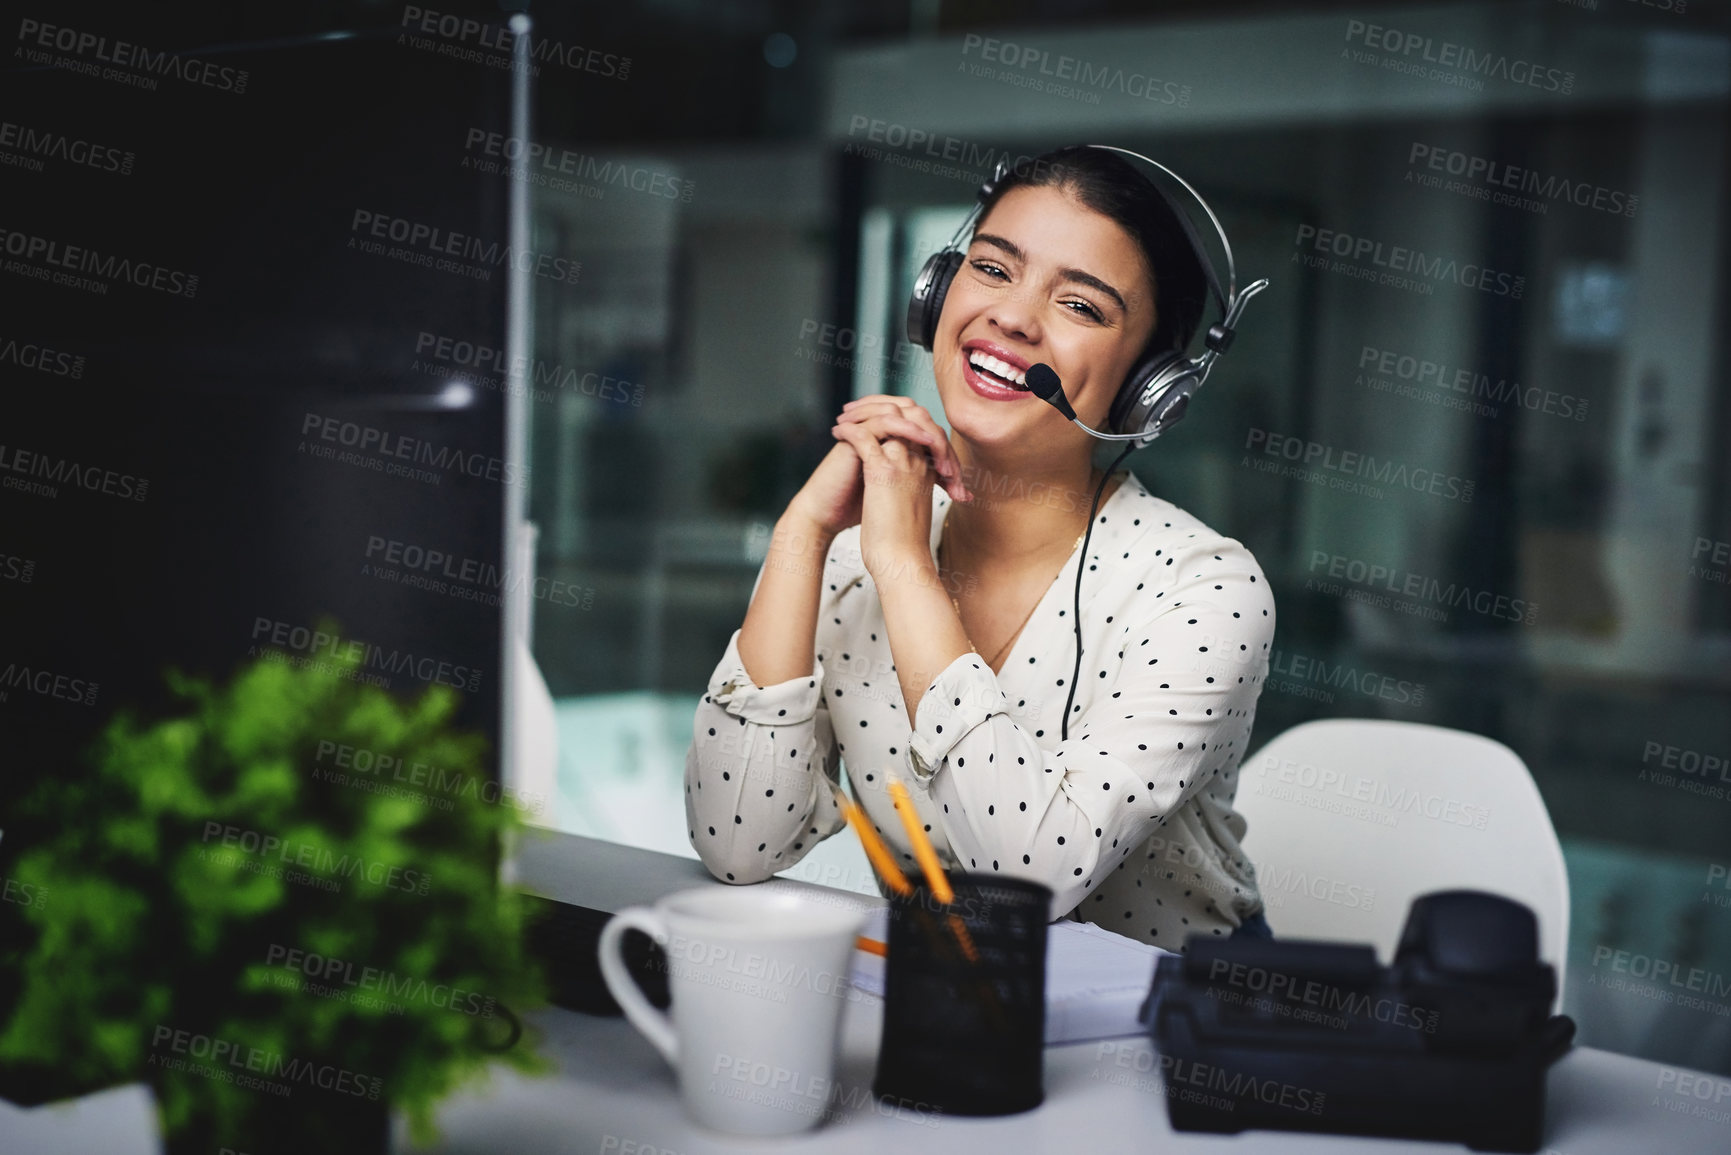 Buy stock photo Cropped portrait of an attractive young businesswoman working late in a call center